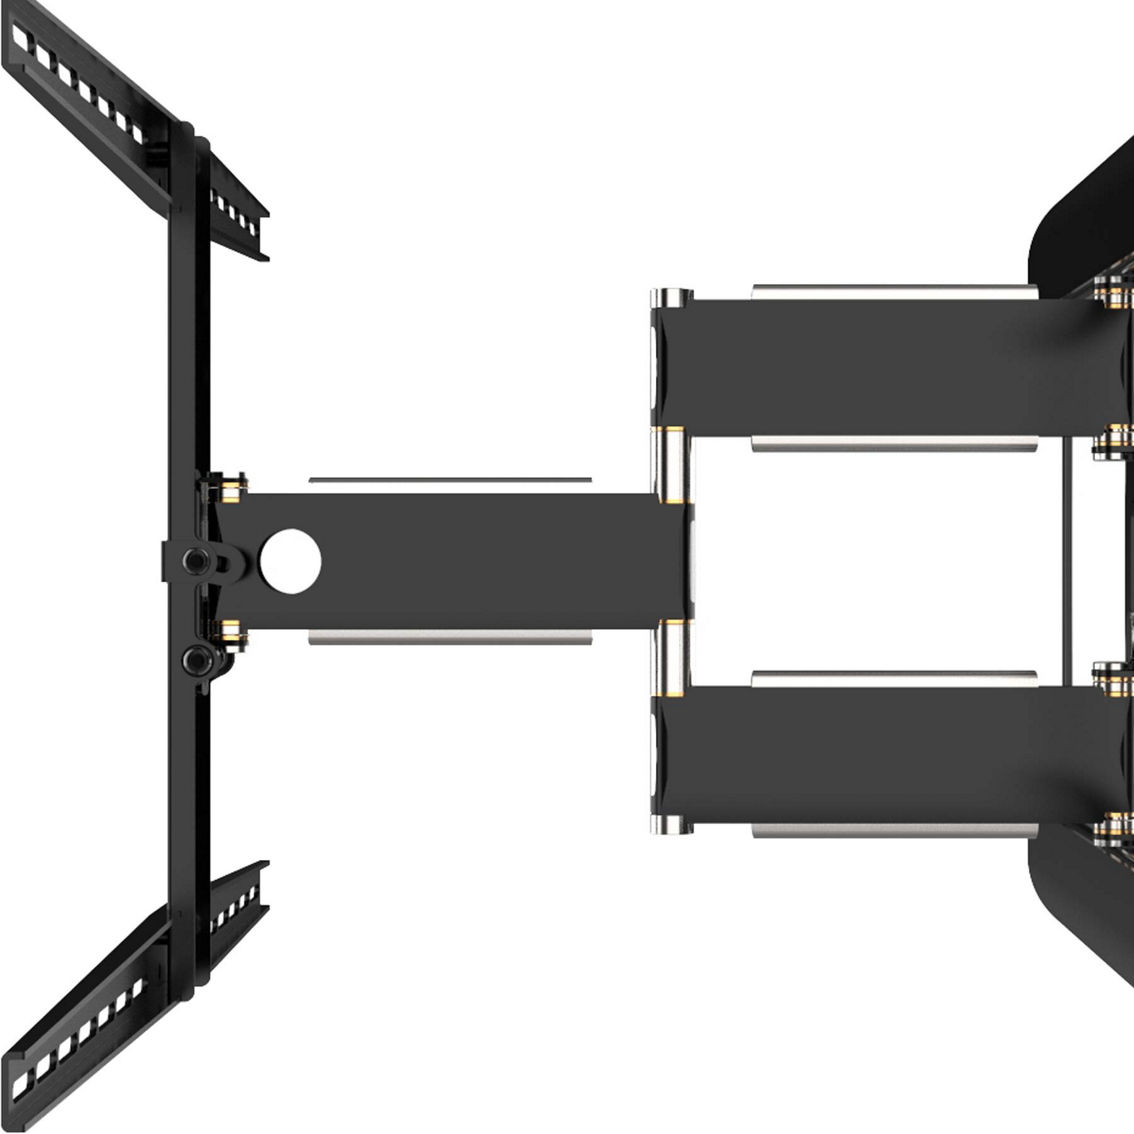 ProMounts Pro Full Motion TV Wall Mount for 37 to 85 in. TVs up to 120 lb. - Image 3 of 10